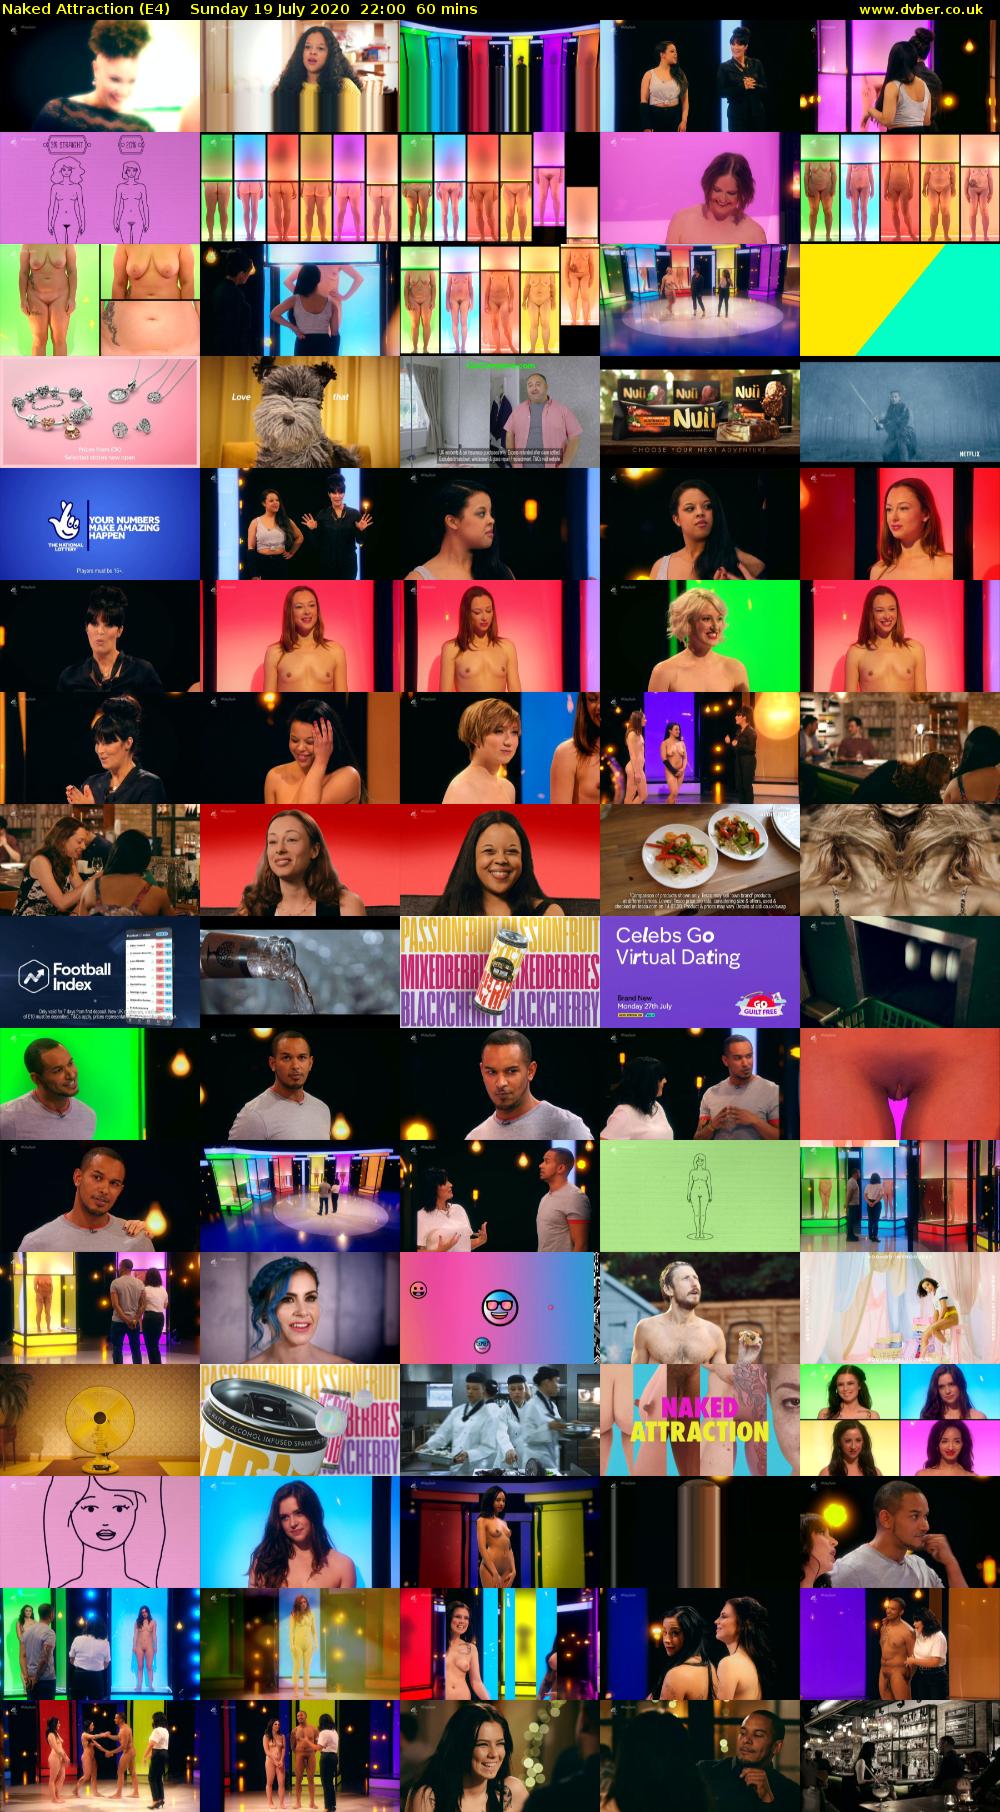 Naked Attraction (E4) Sunday 19 July 2020 22:00 - 23:00